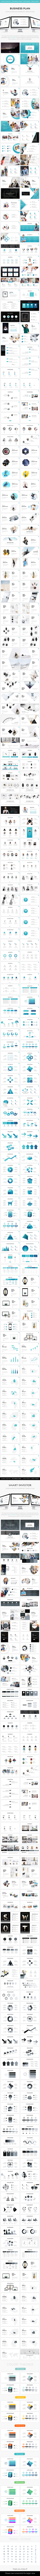 Bundle 2 in 1 Startup Business Powerpoint Template